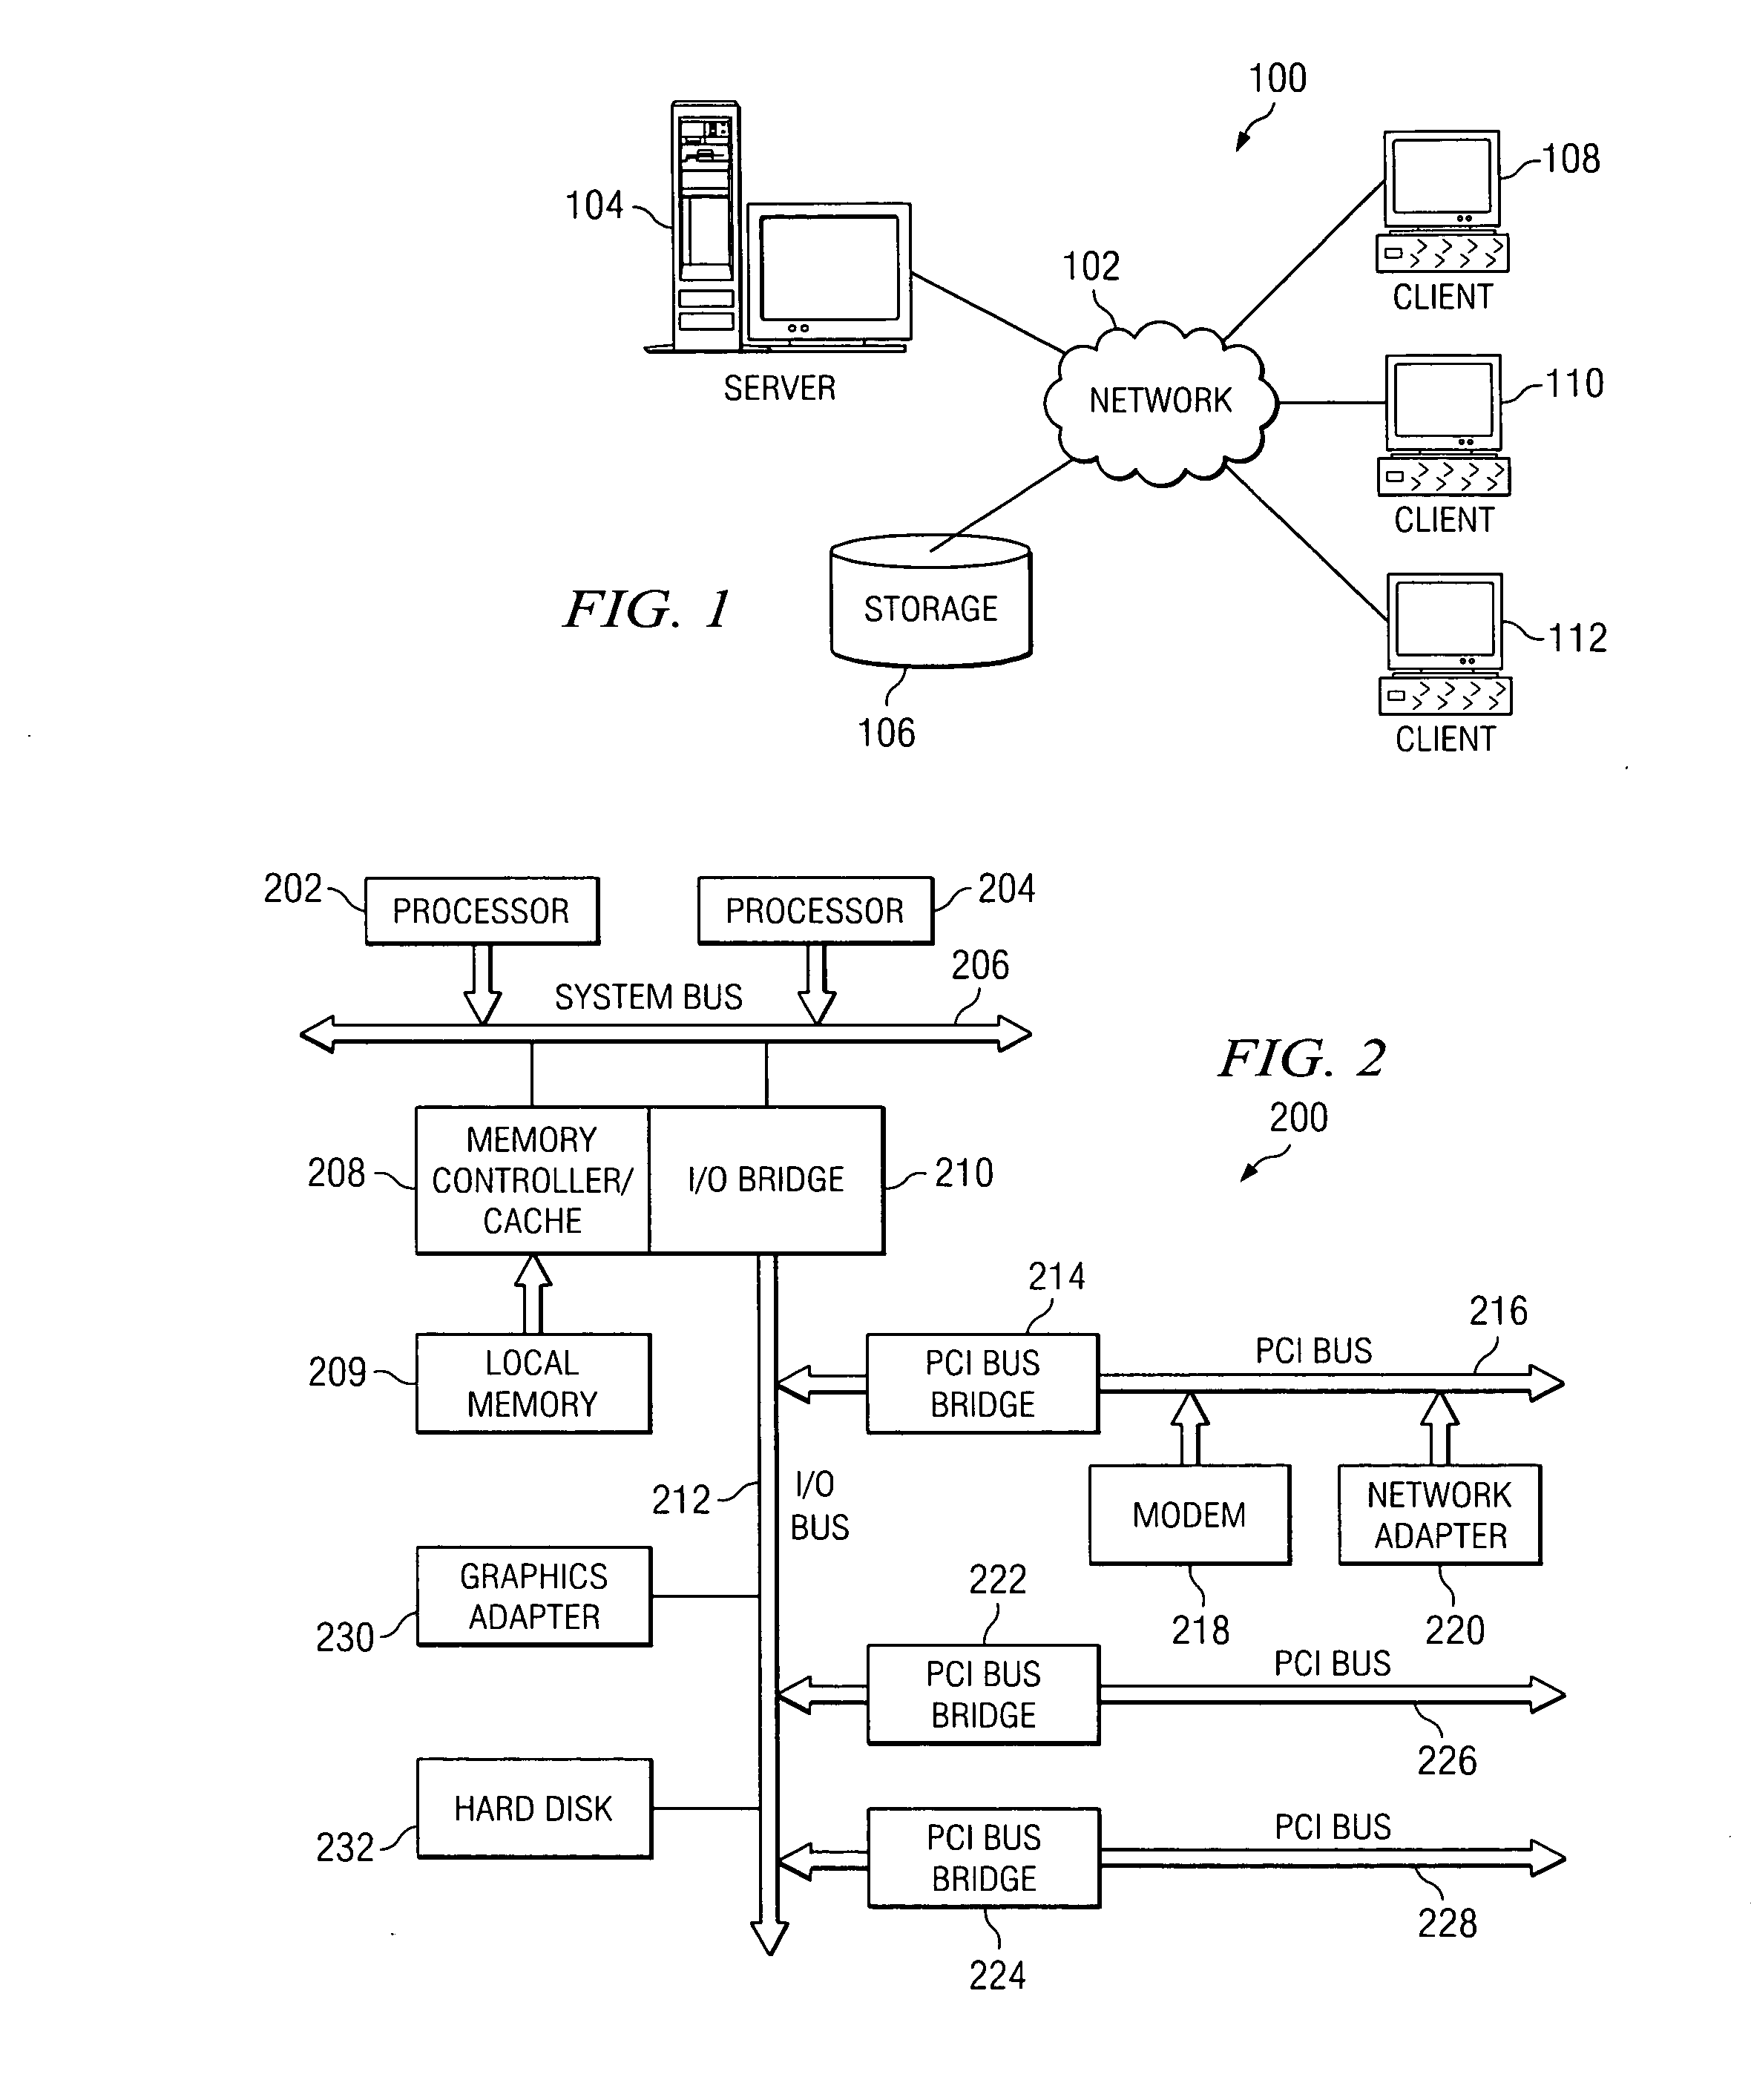 System and method for providing a transient dictionary that travels with an original electronic document